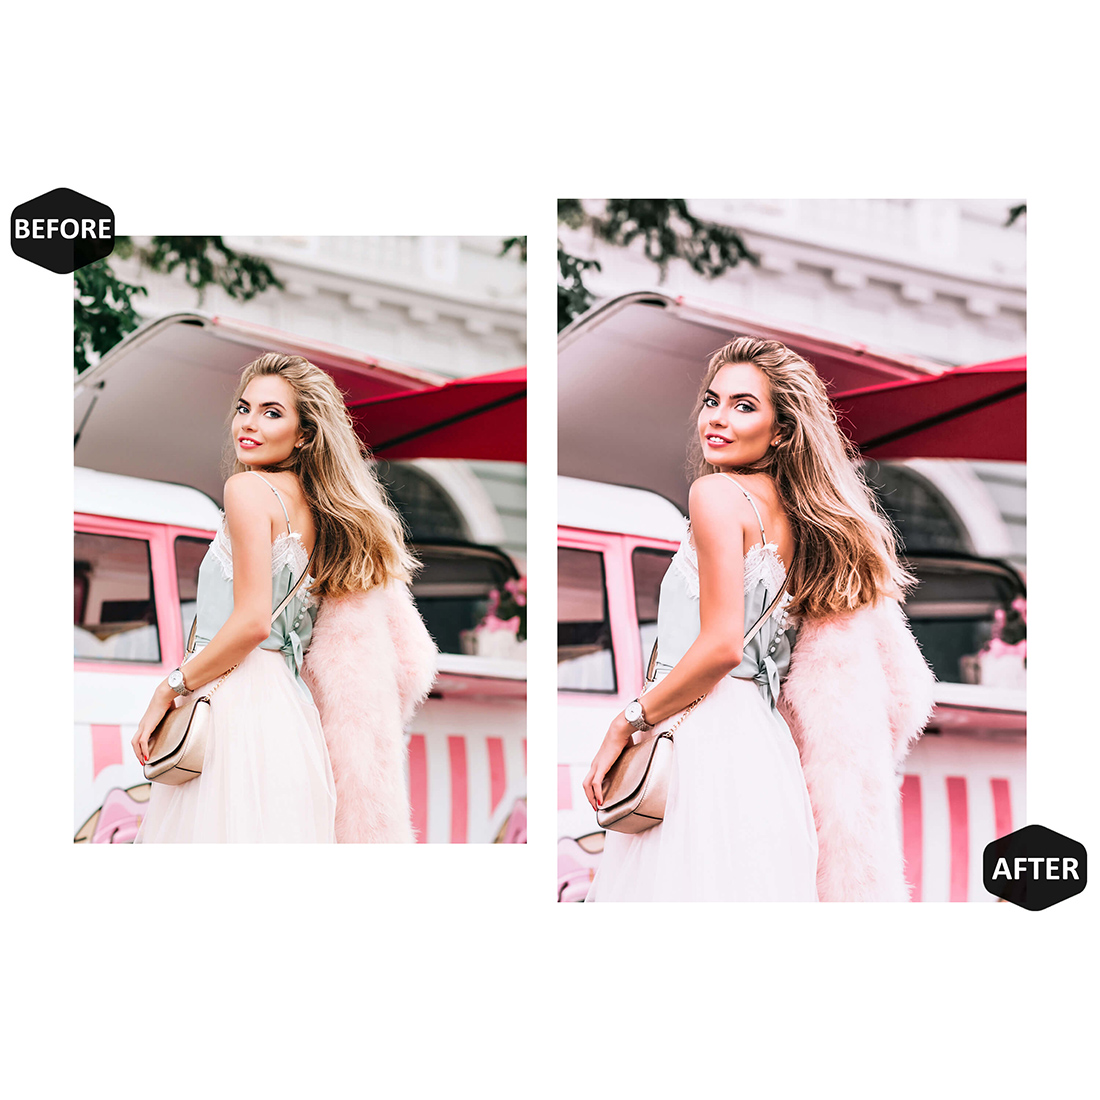 12 Photoshop Actions, Sweet Girl Ps Action, Light ACR Preset, Colorful Ps Filter, Atn Pictures And style Theme For Instagram, Blogger preview image.